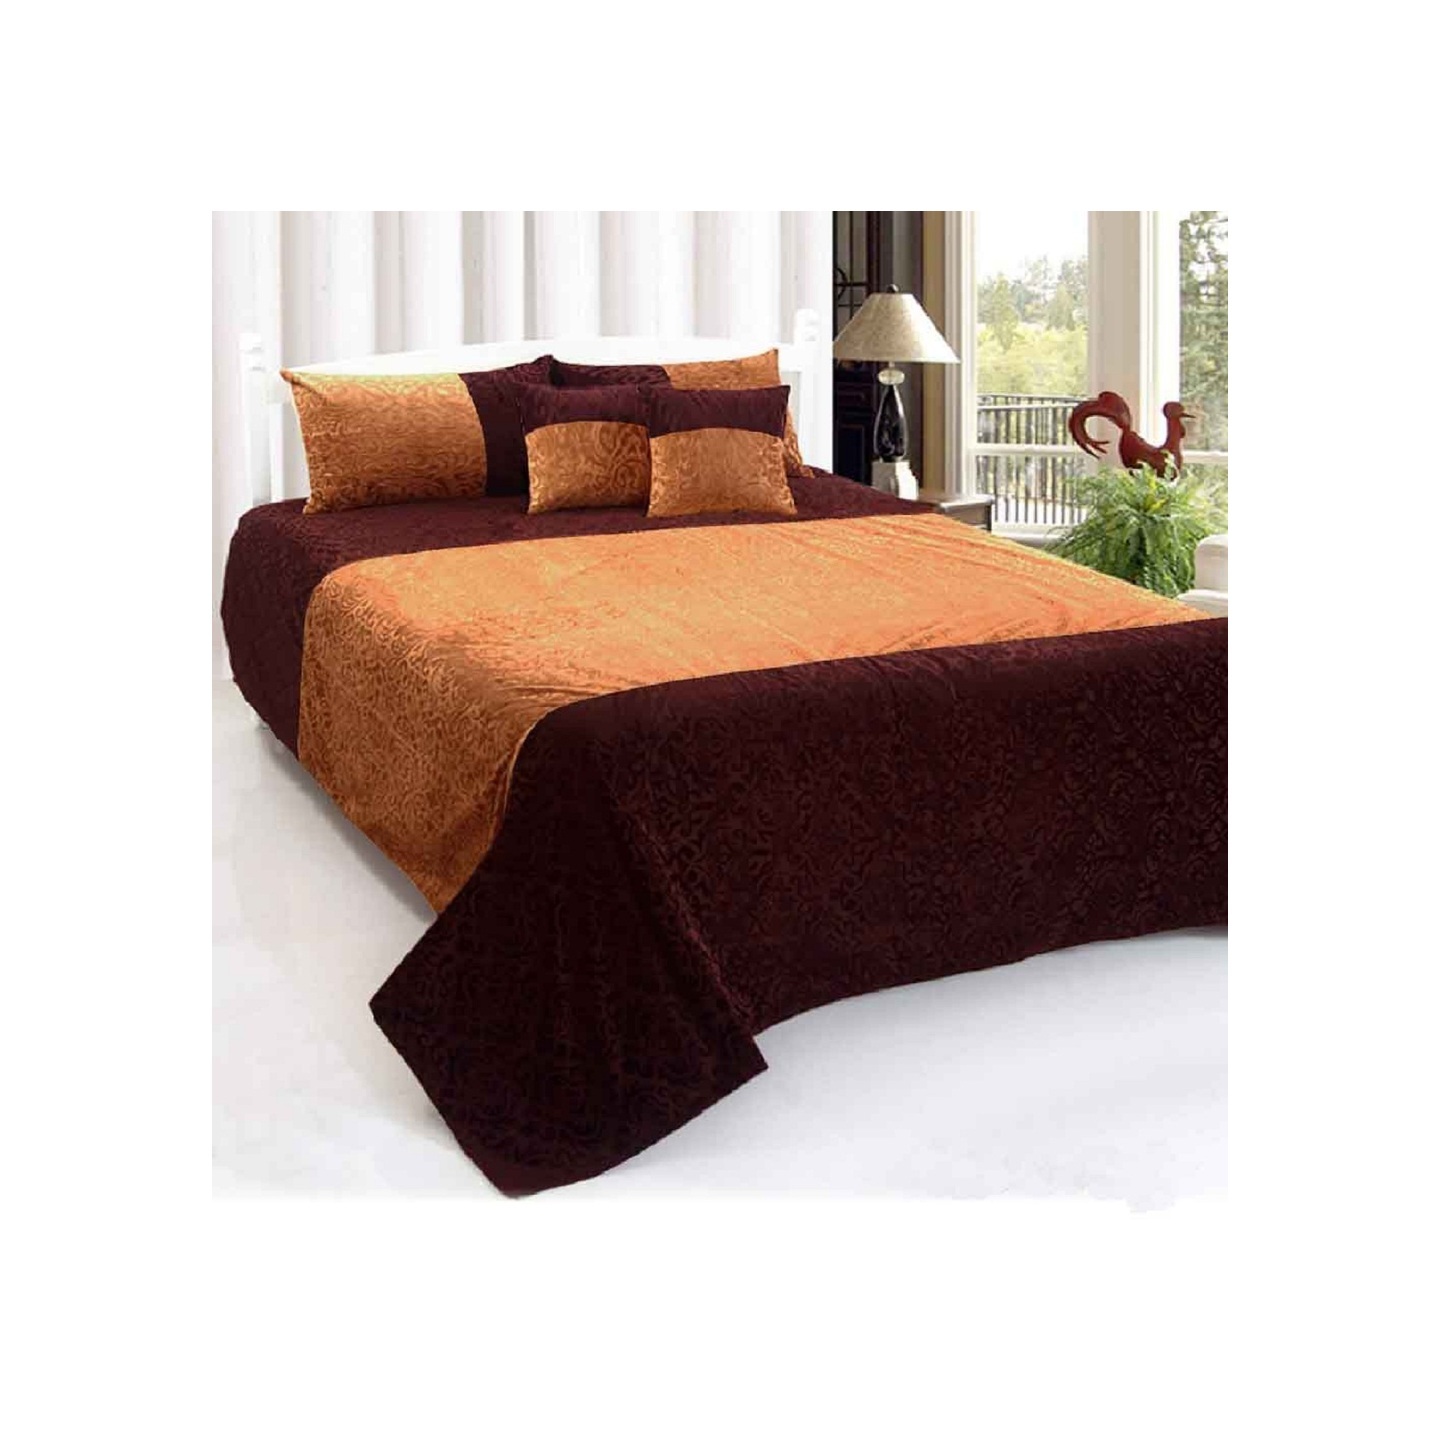 Handtex Home Coffee Camel Velvet Double Bedsheet,2 cushion cover and 2 pillow cover